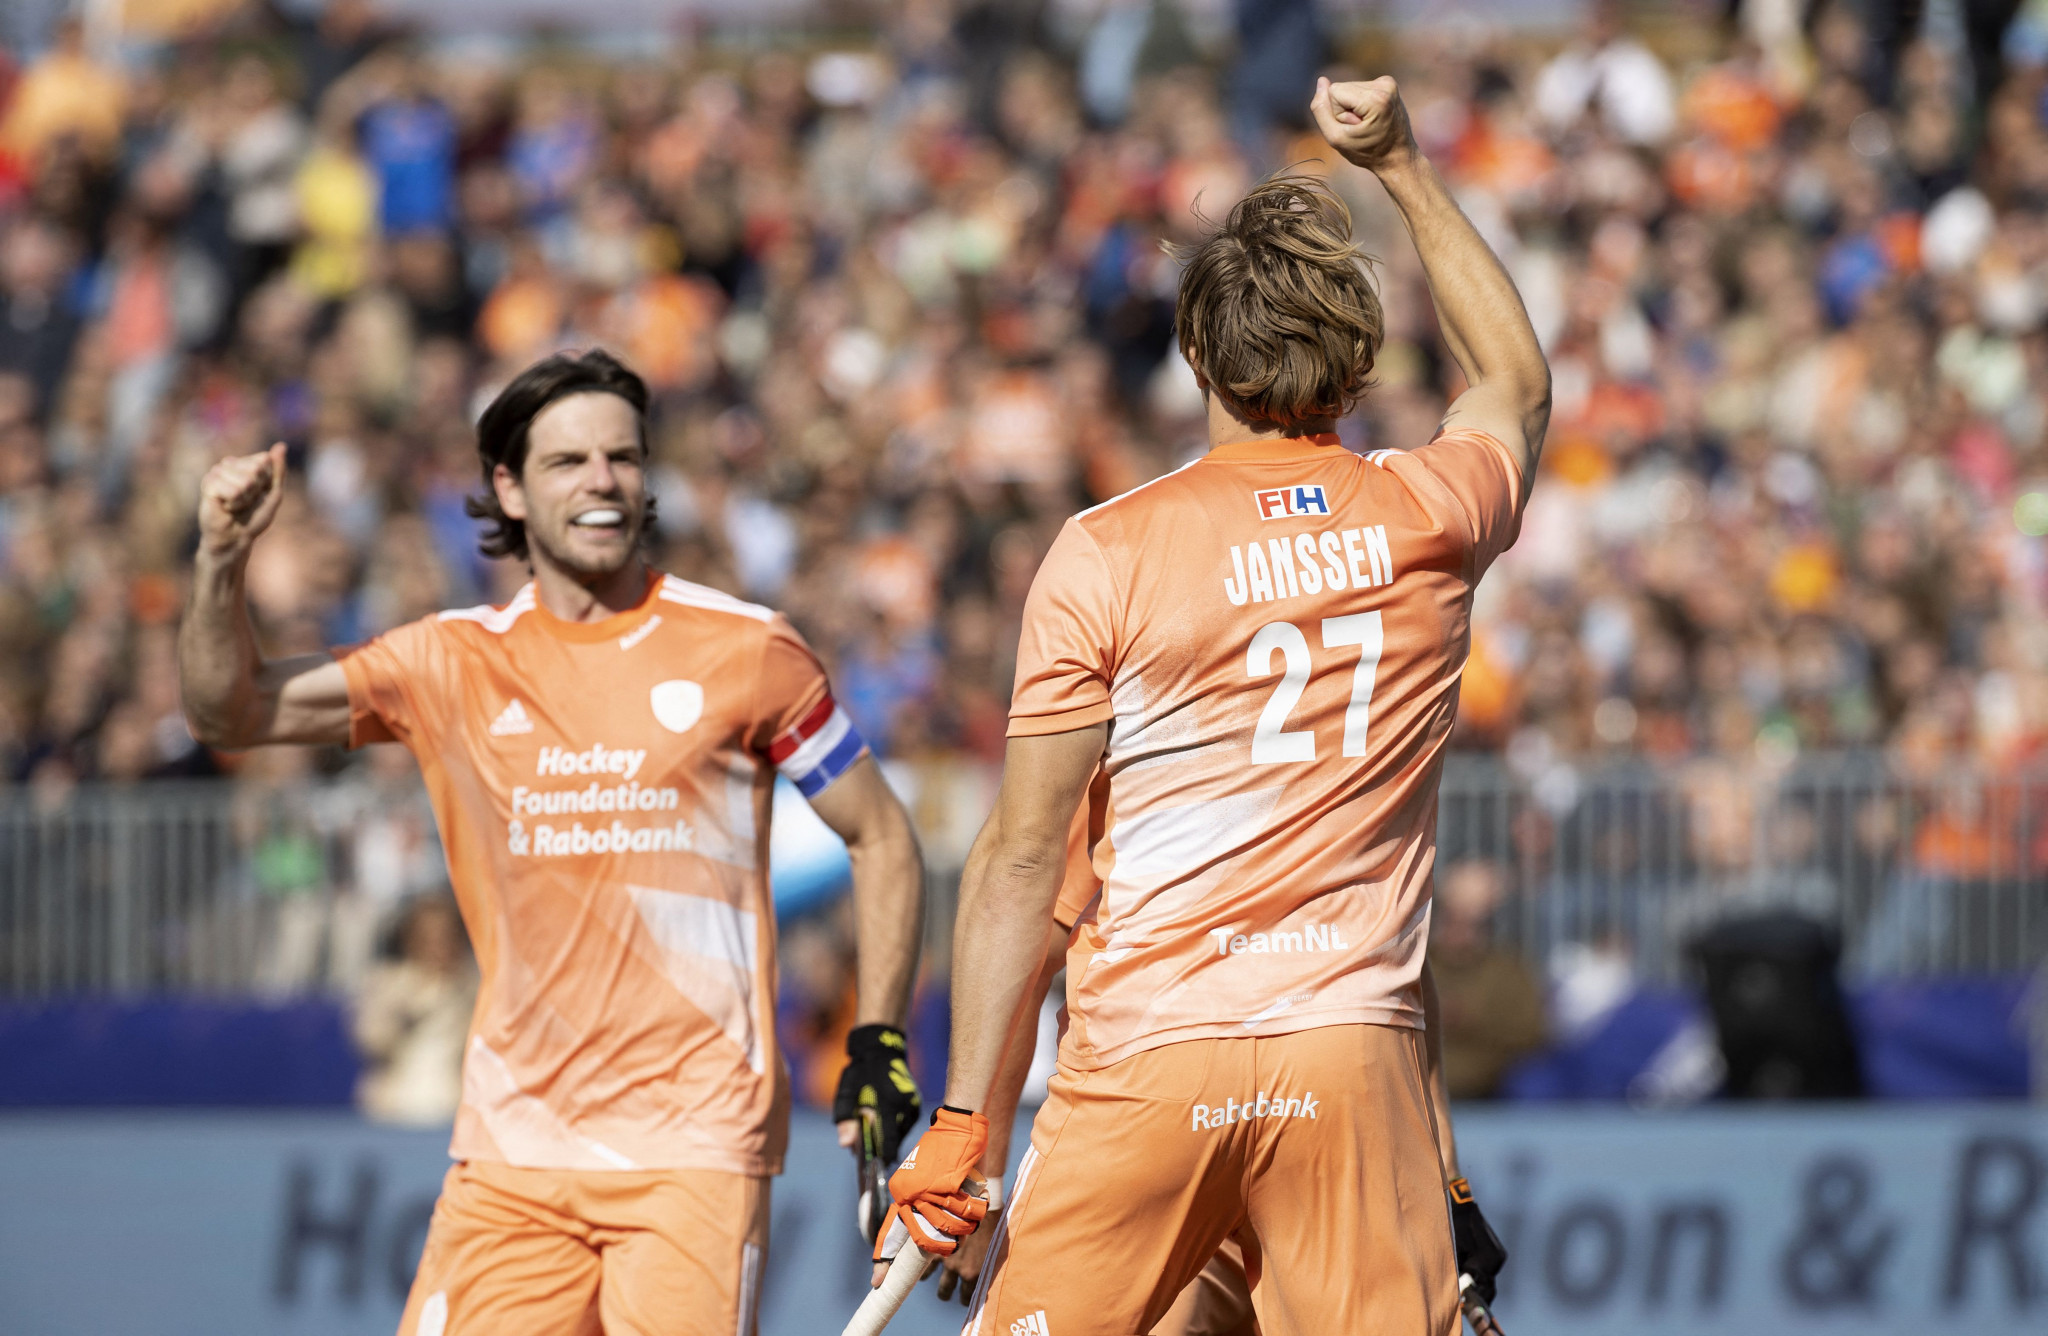 The Netherlands beat Argentina 3-1 in the men's FIH Pro League to remain undefeated ©Getty Images